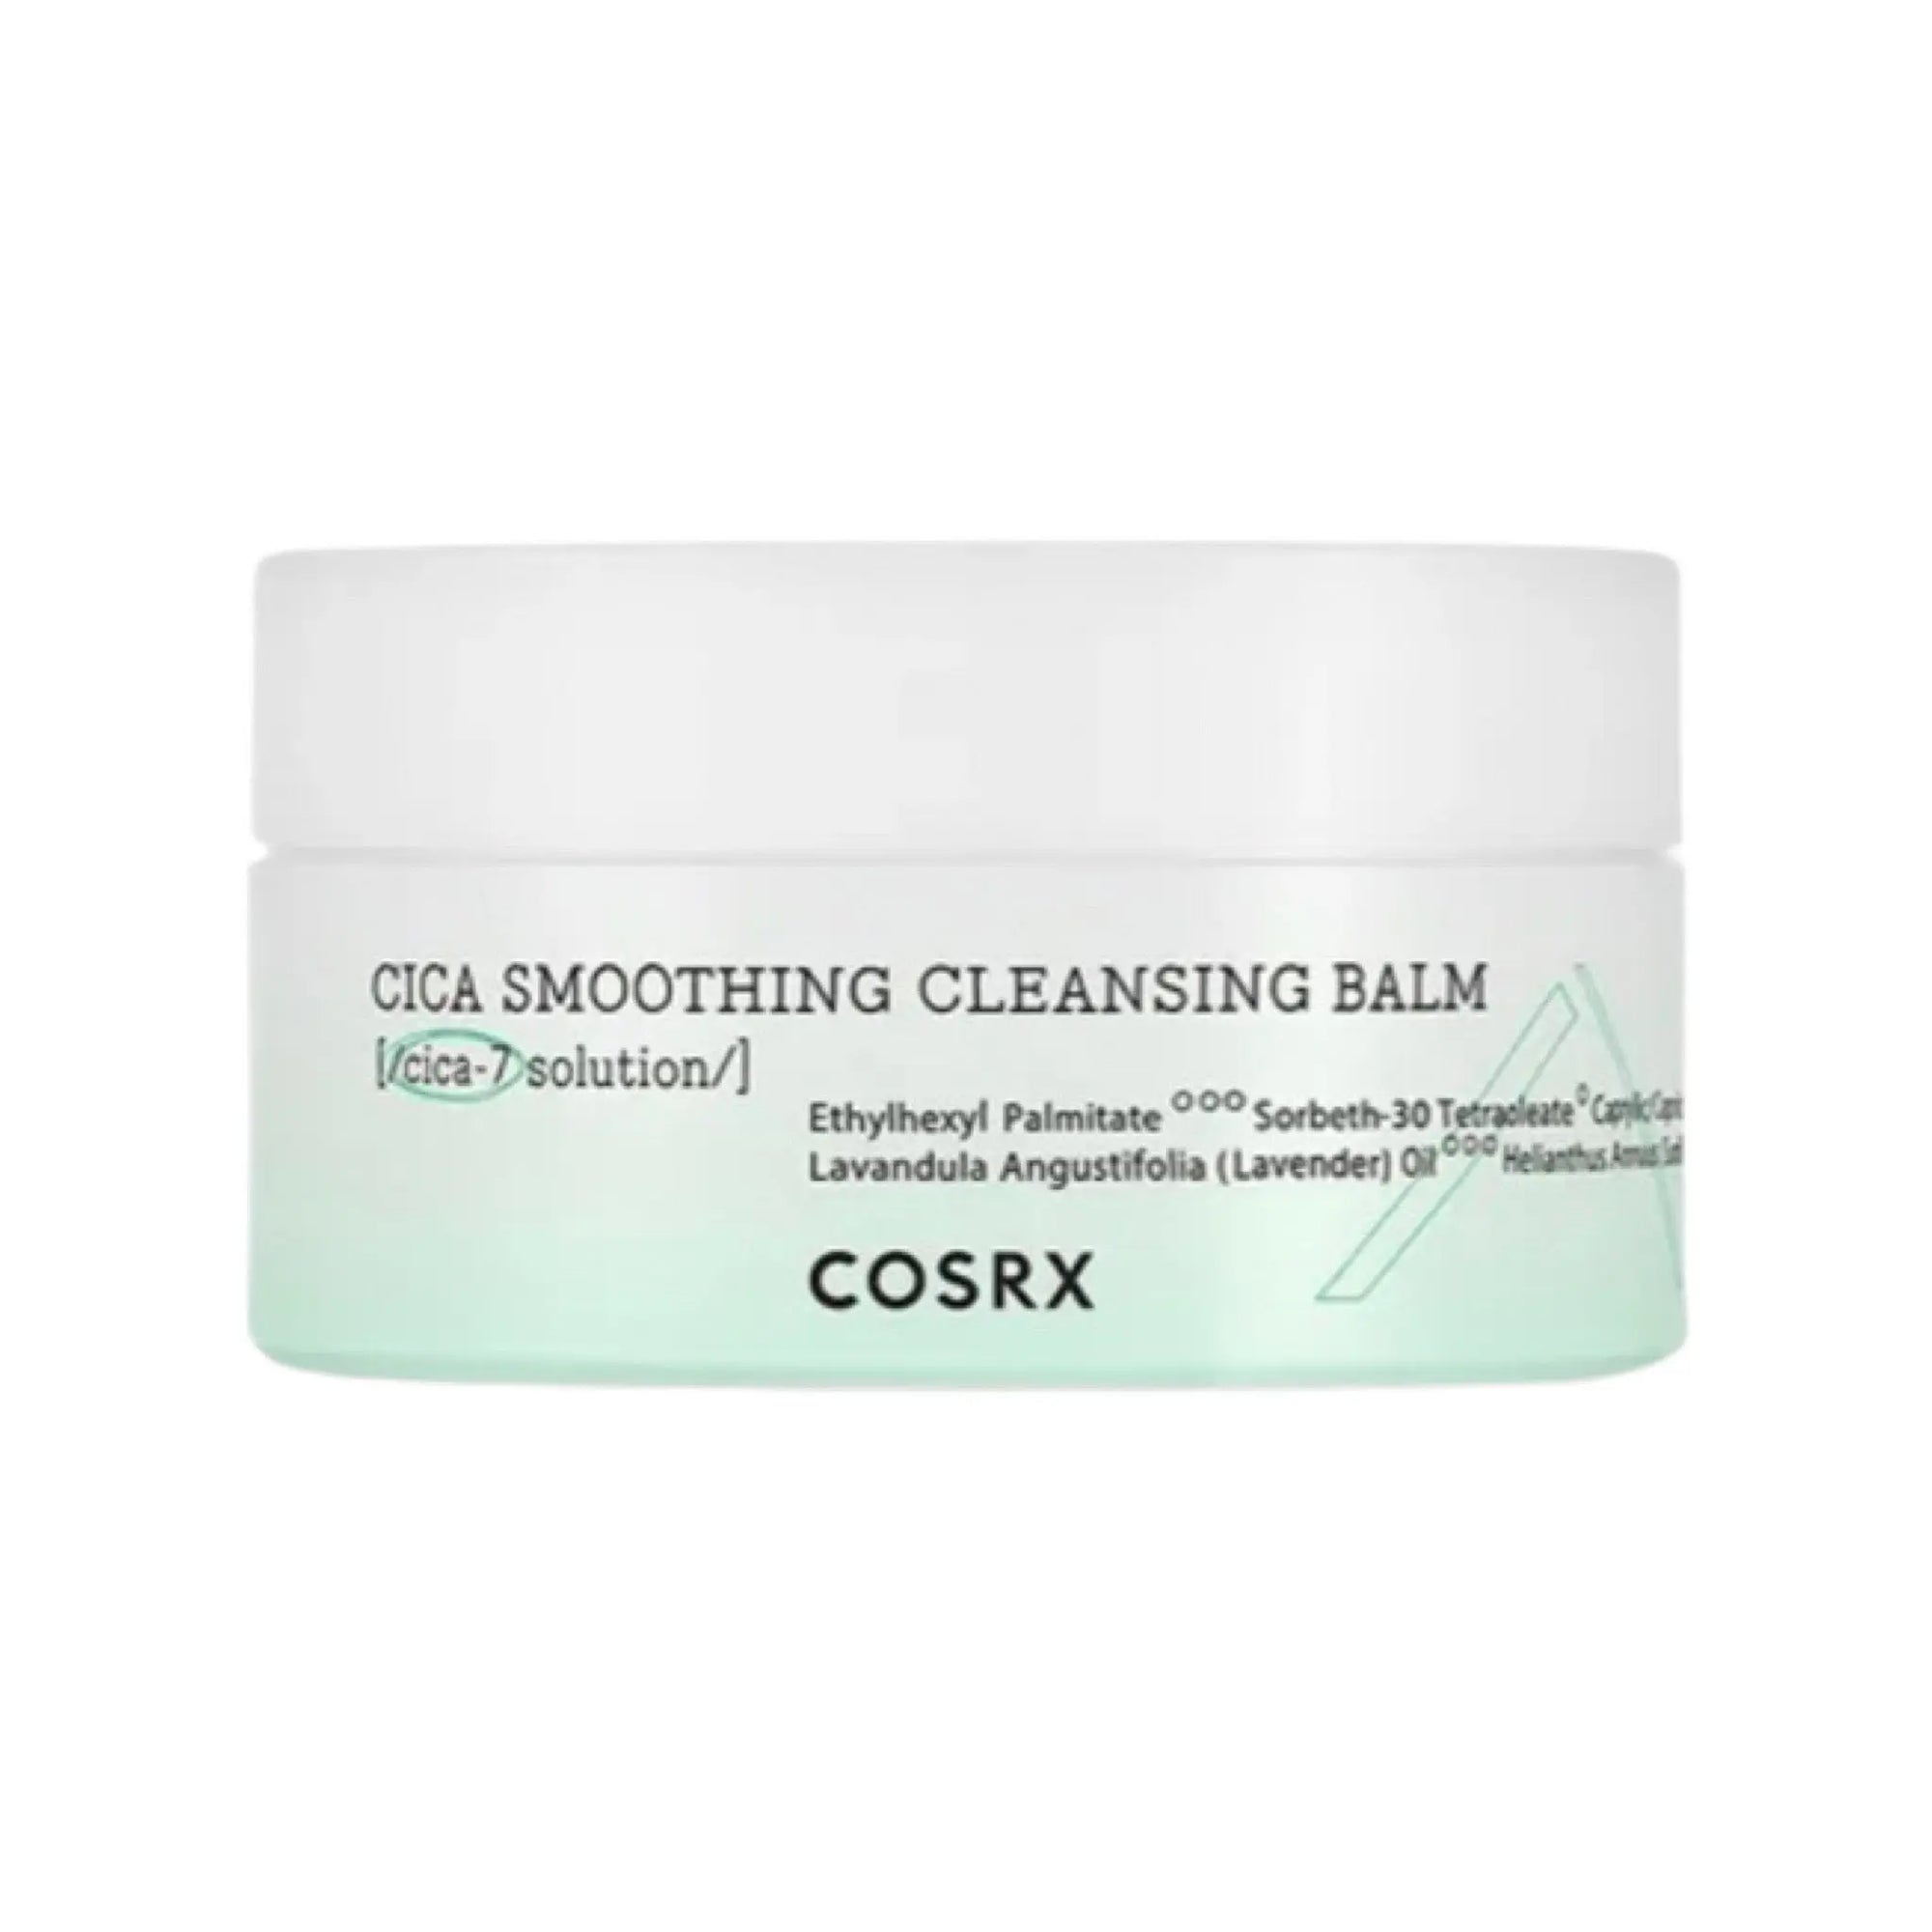 COSRX - Cica Smoothing Cleansing Balm 120mL WanderShop